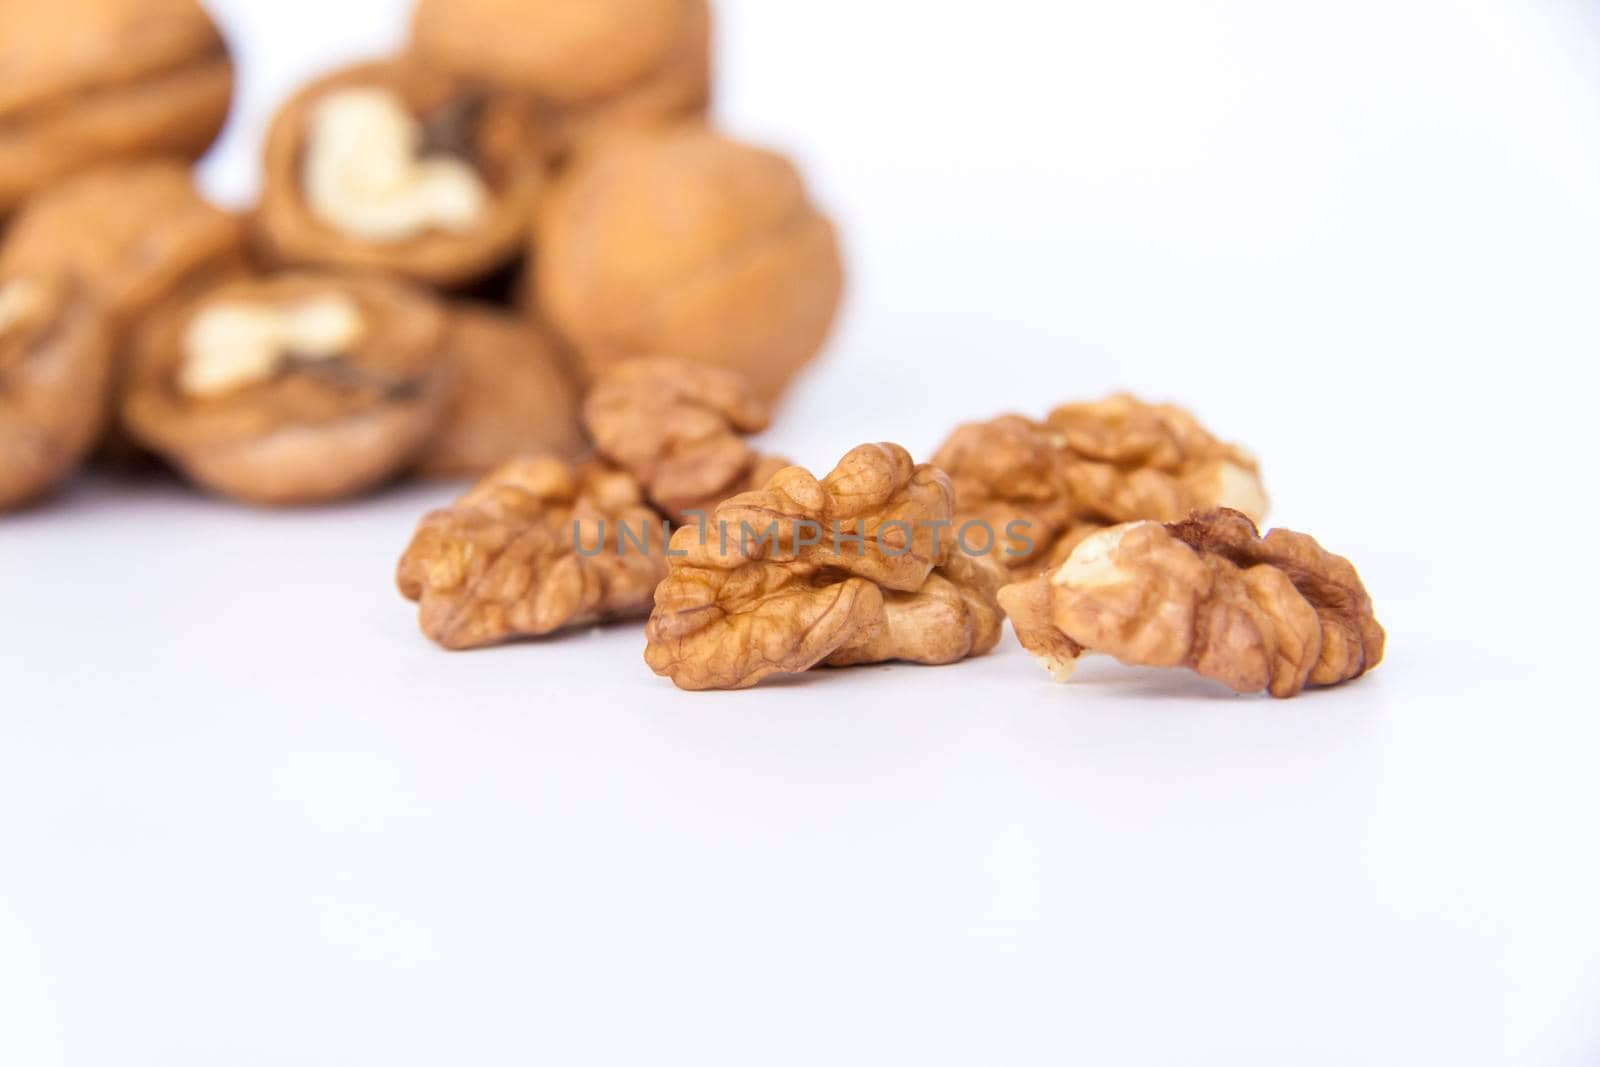 Walnuts in a shell on a white background. Healthy nuts. Walnuts.